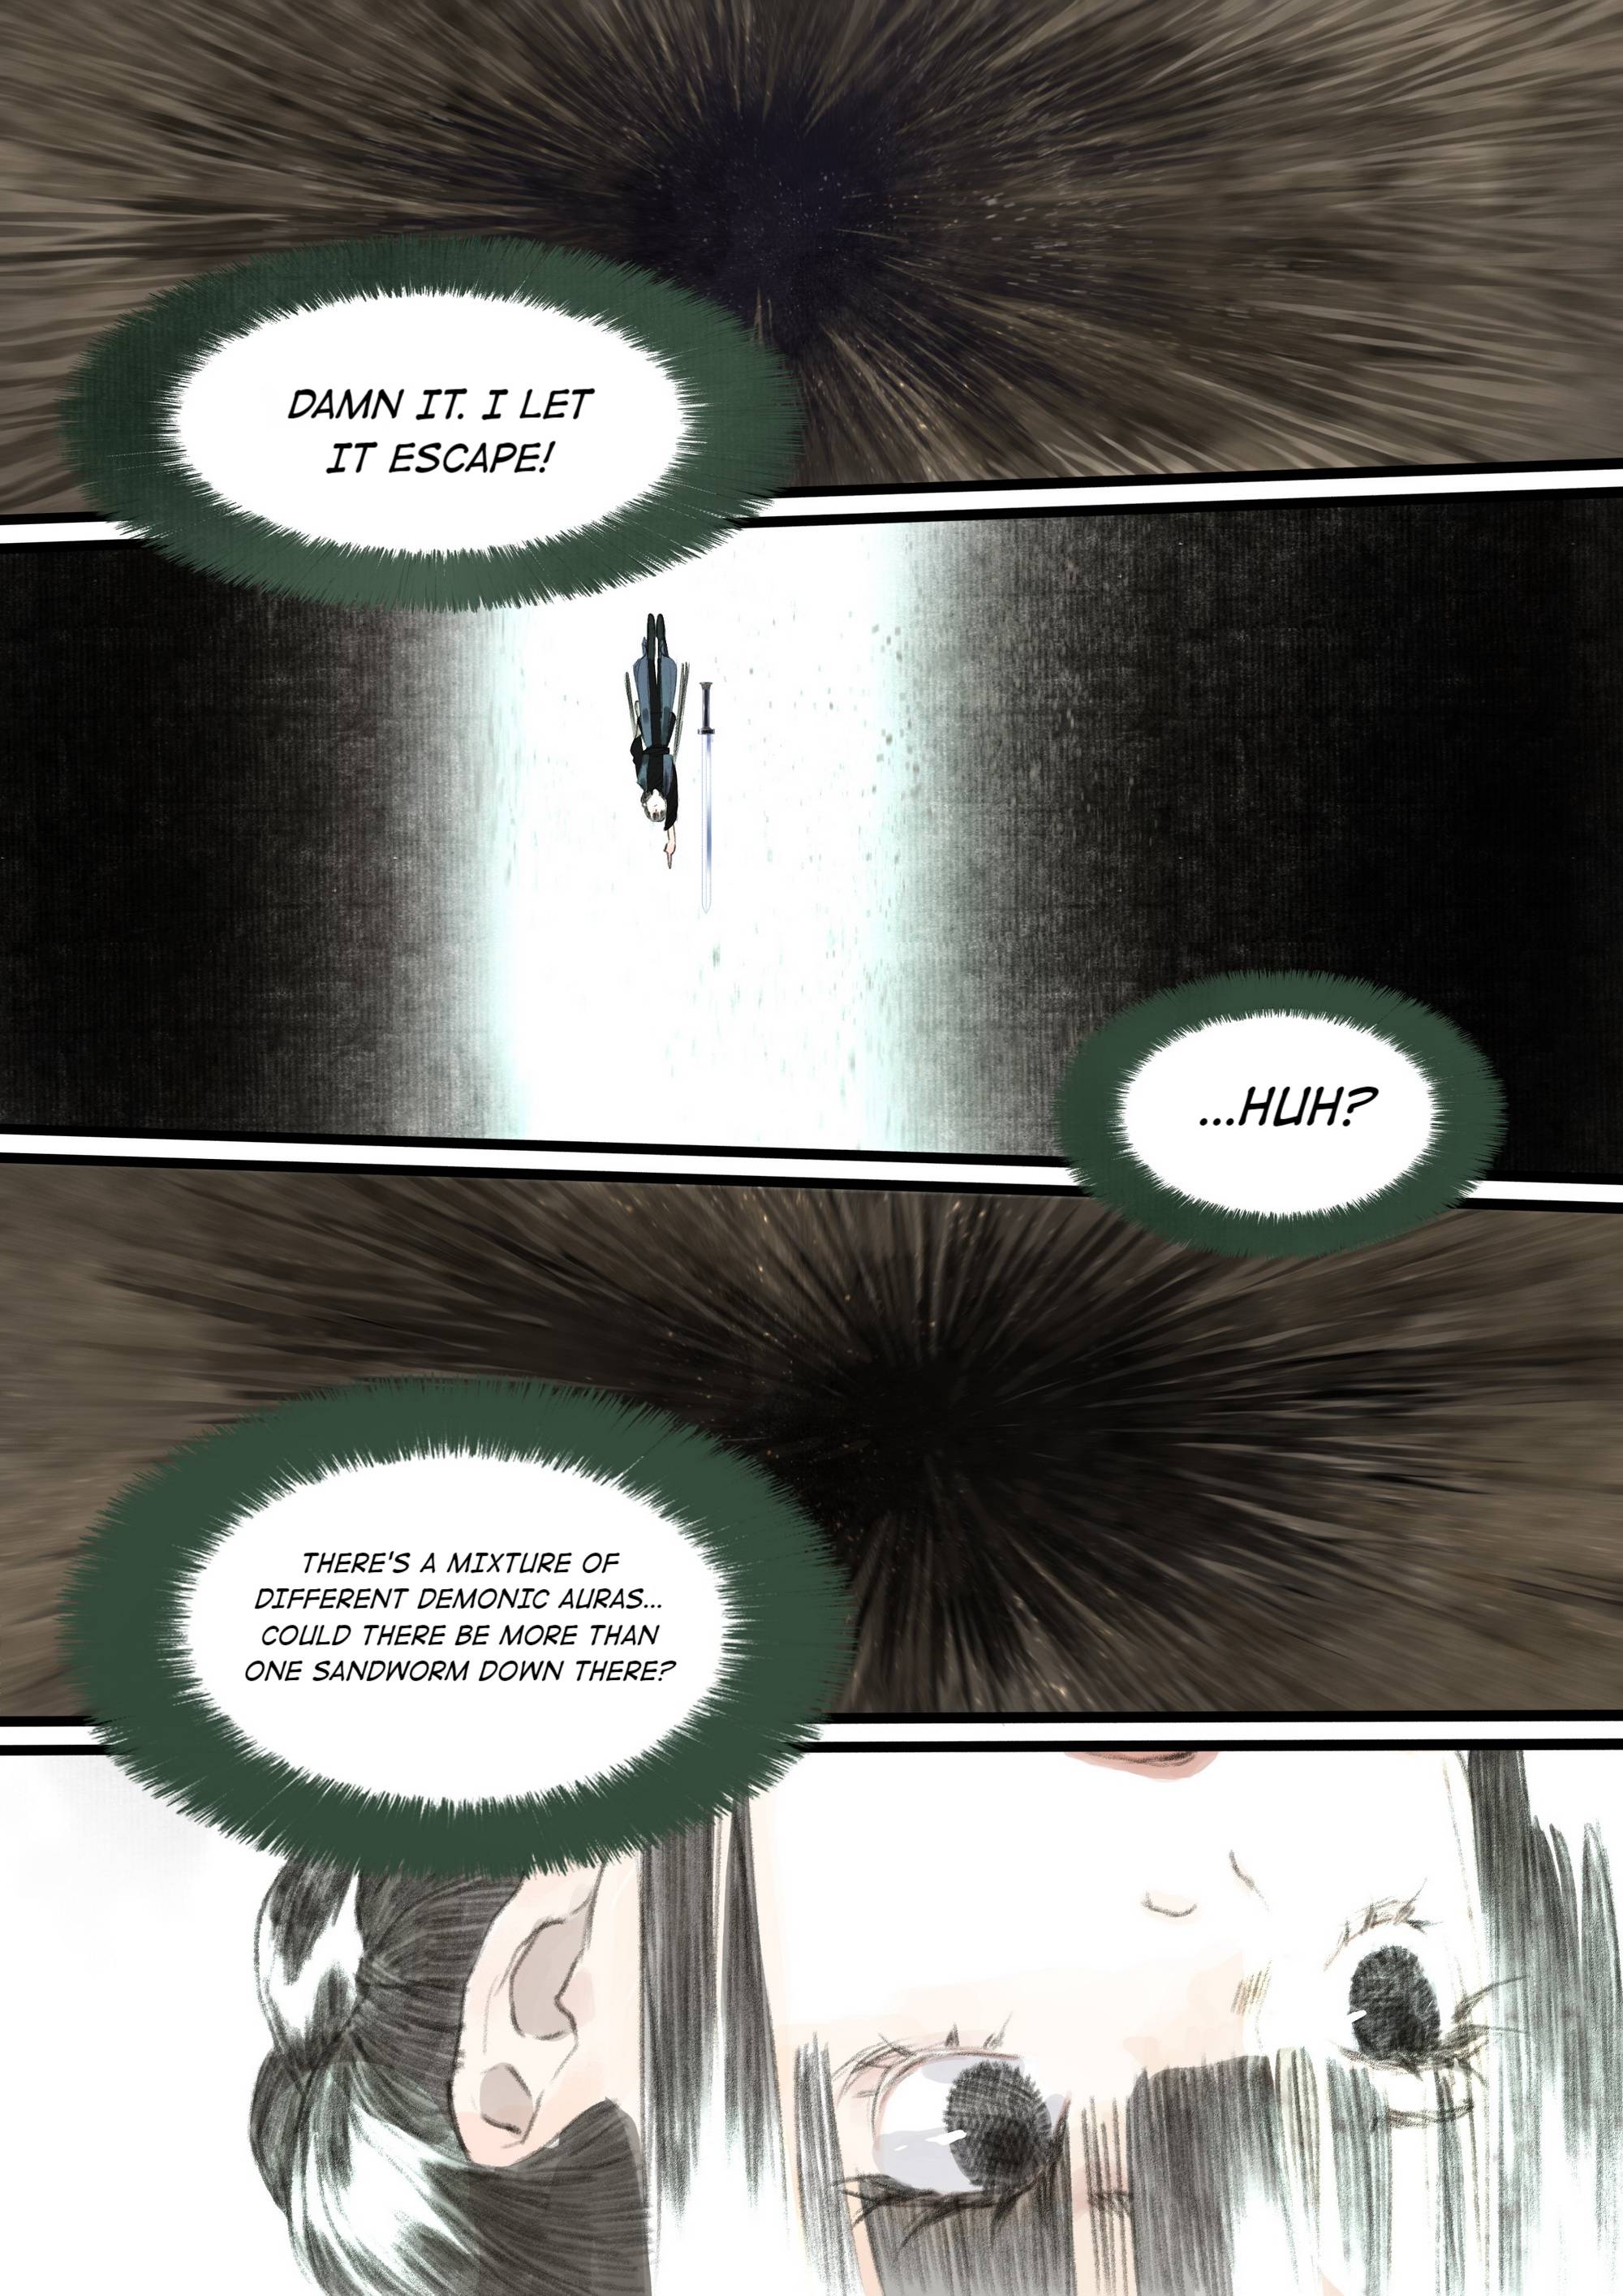 Song Of The Sky Pacers - Page 3